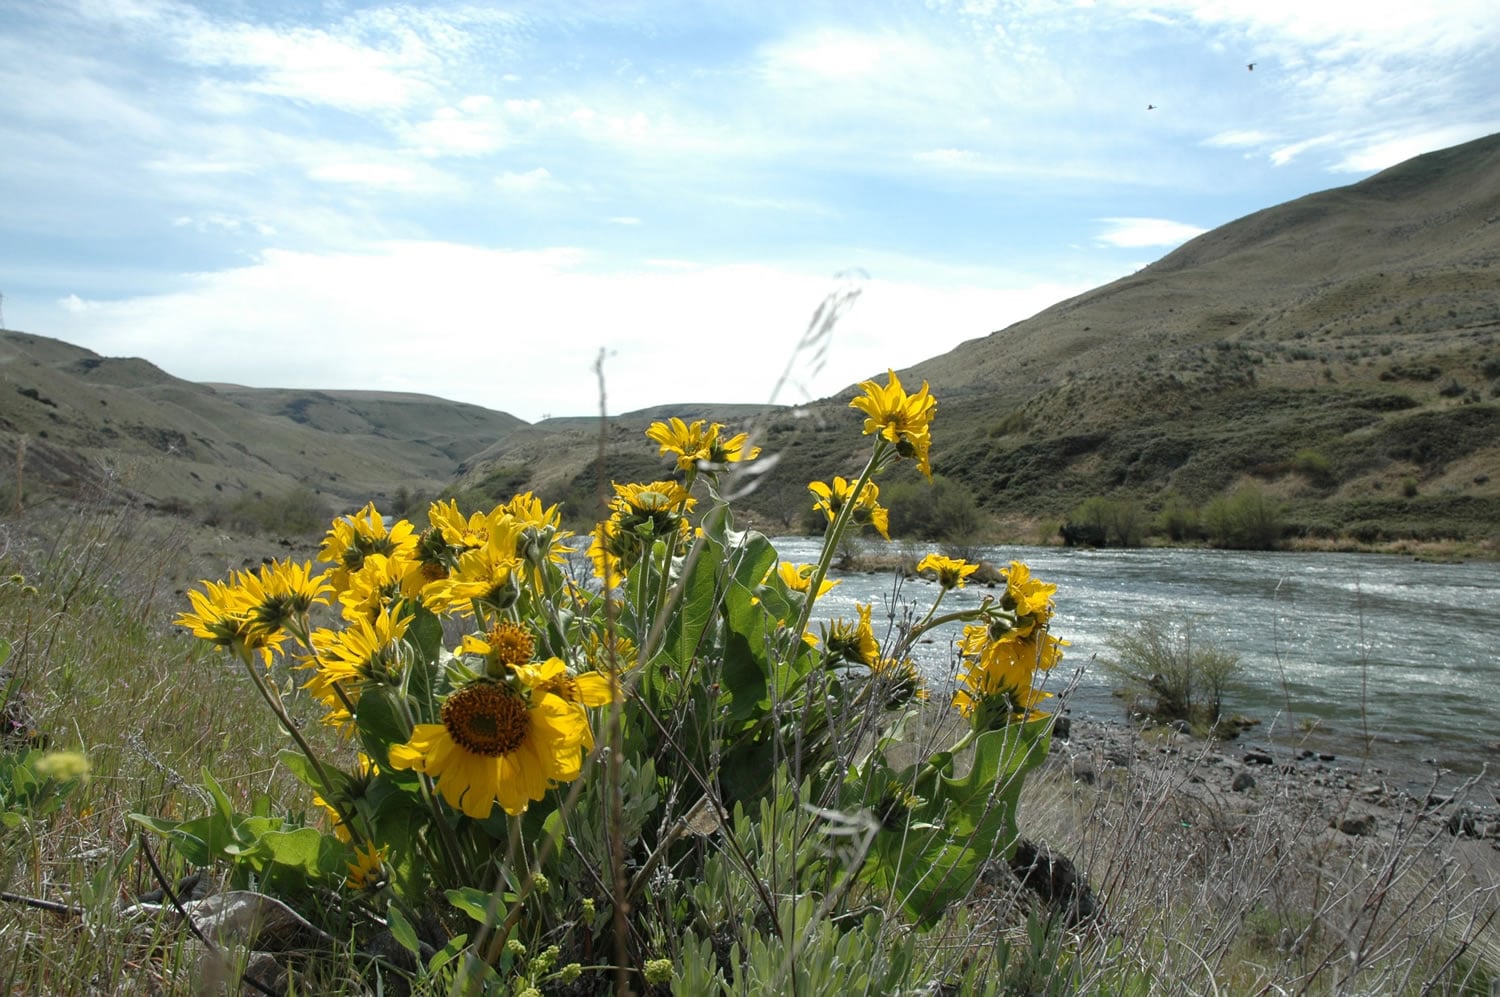 Hikers along the lower Deschutes River will find lots of balsamroot blooming at this time of year.